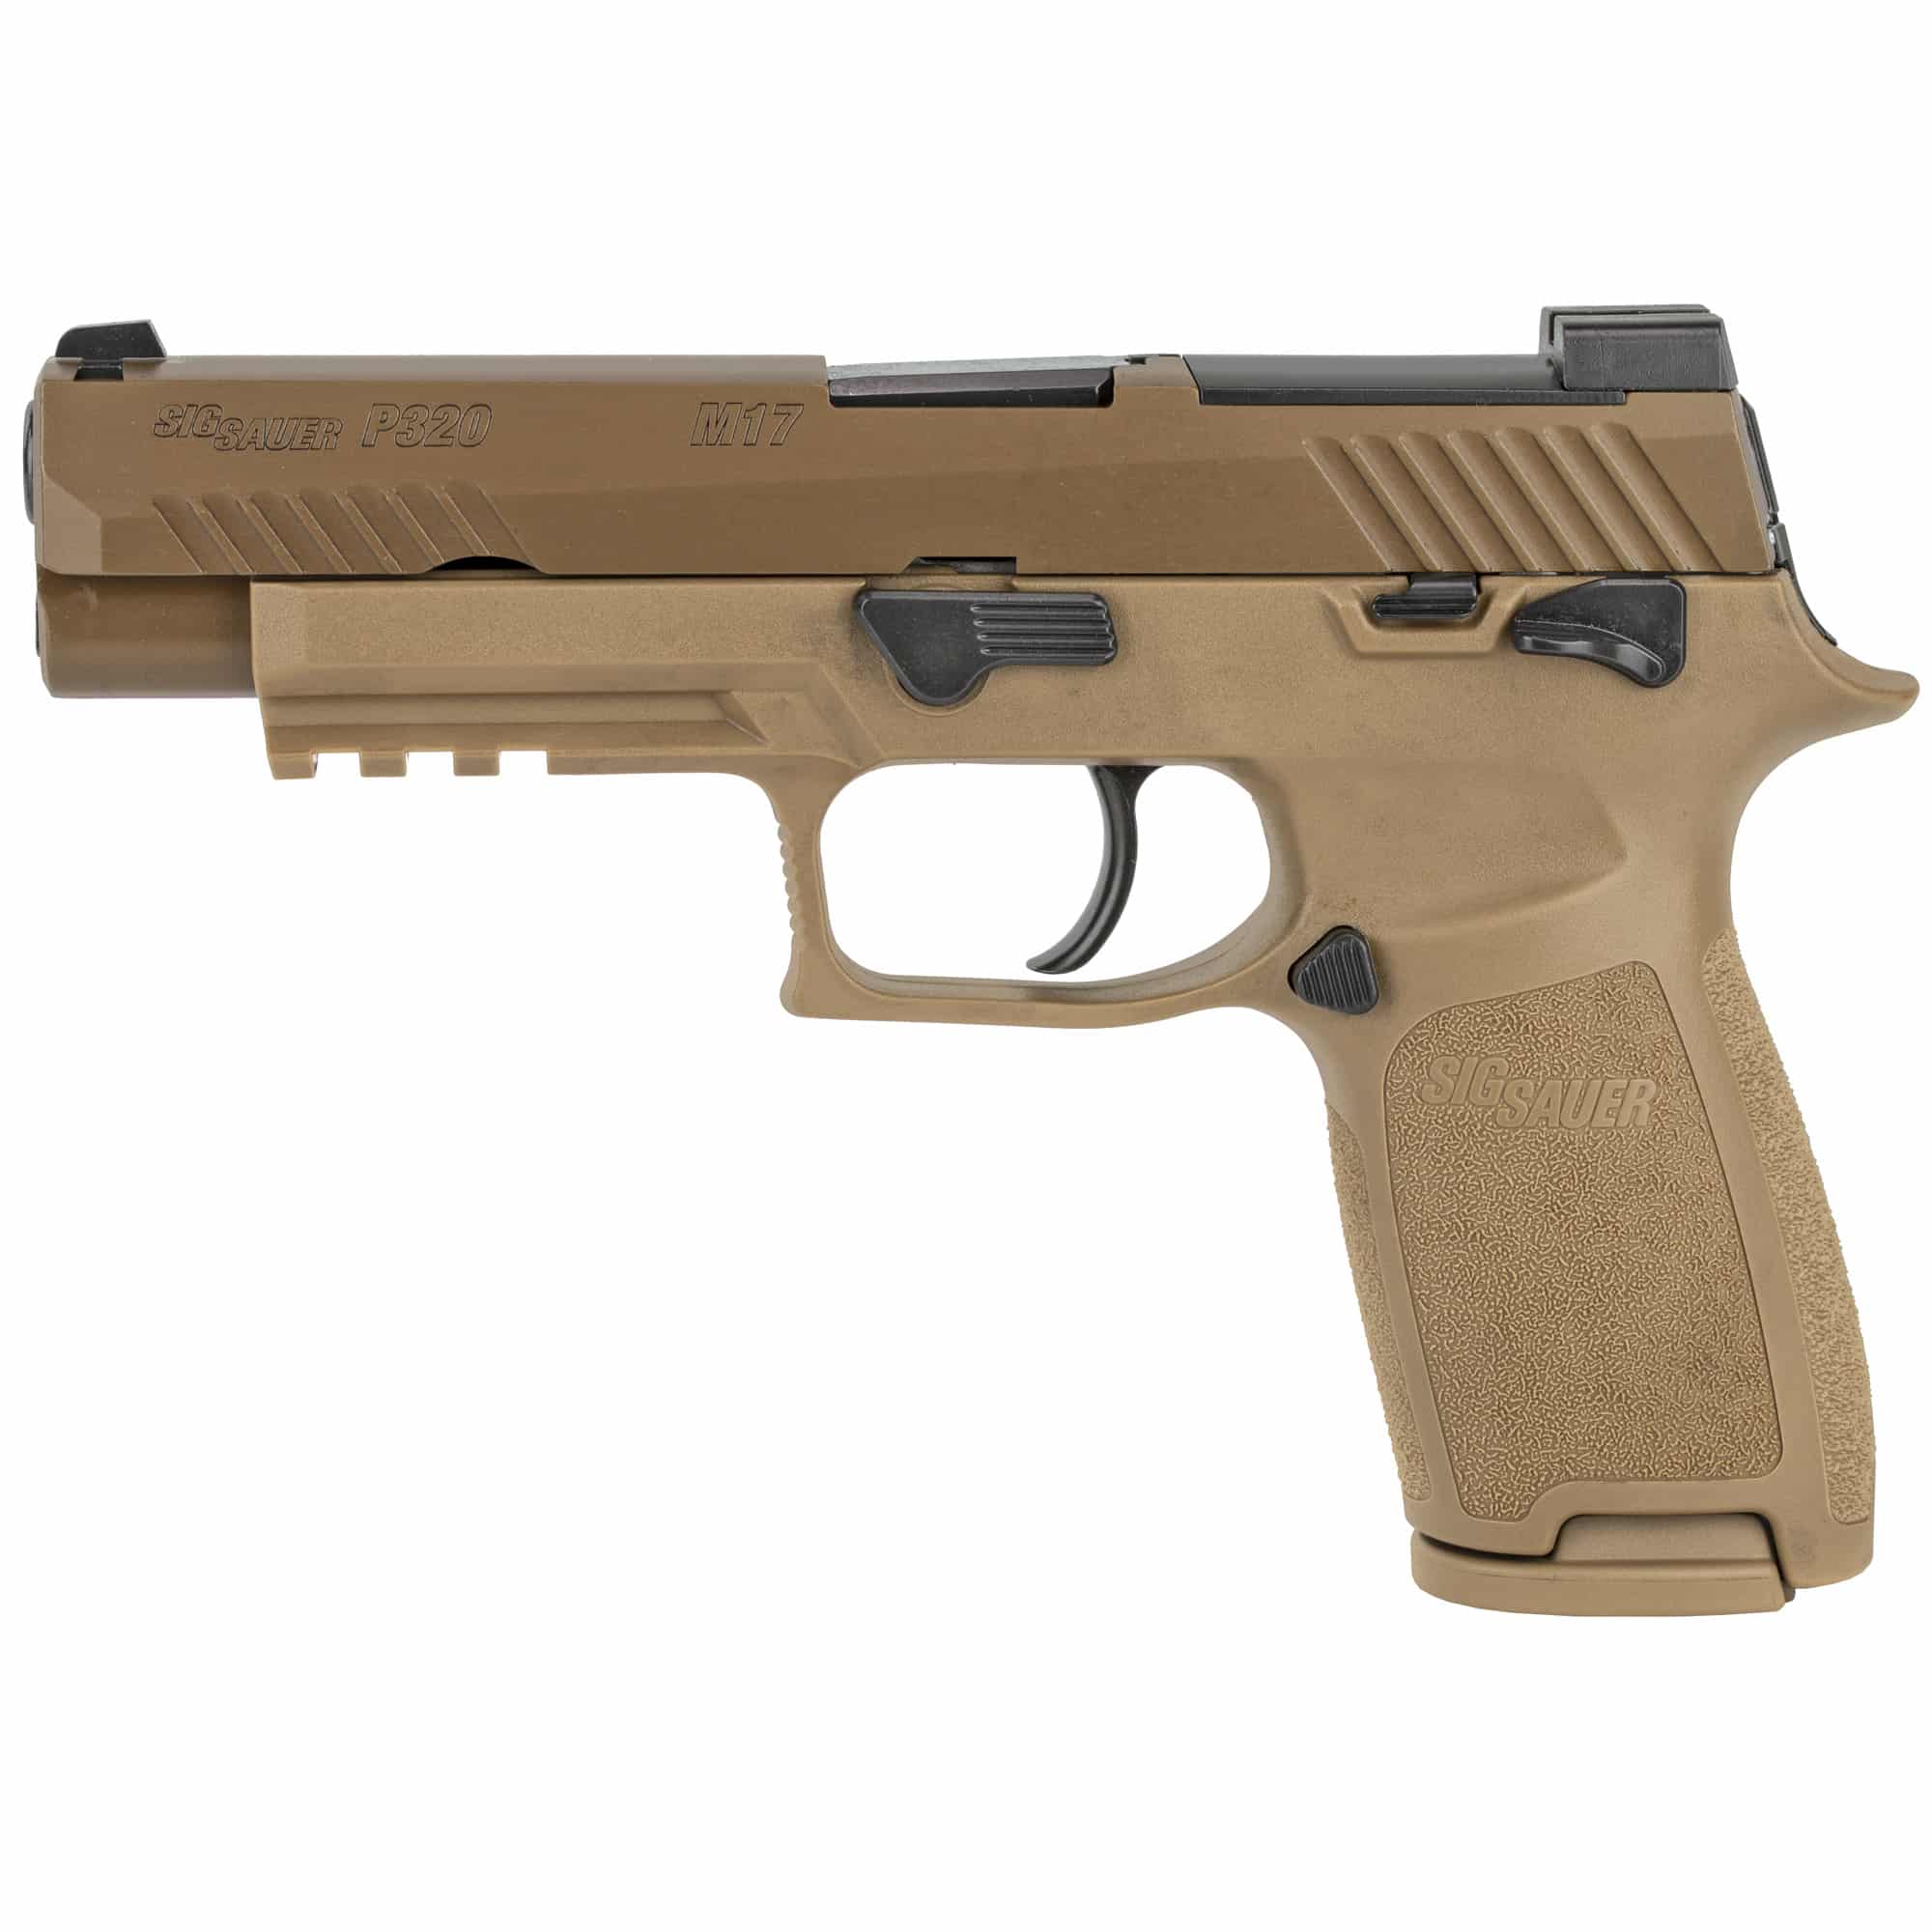 https://cityarsenal.com/product/sig-sauer-p320-m17-9mm-pistol-coyote-with-manual-safety/